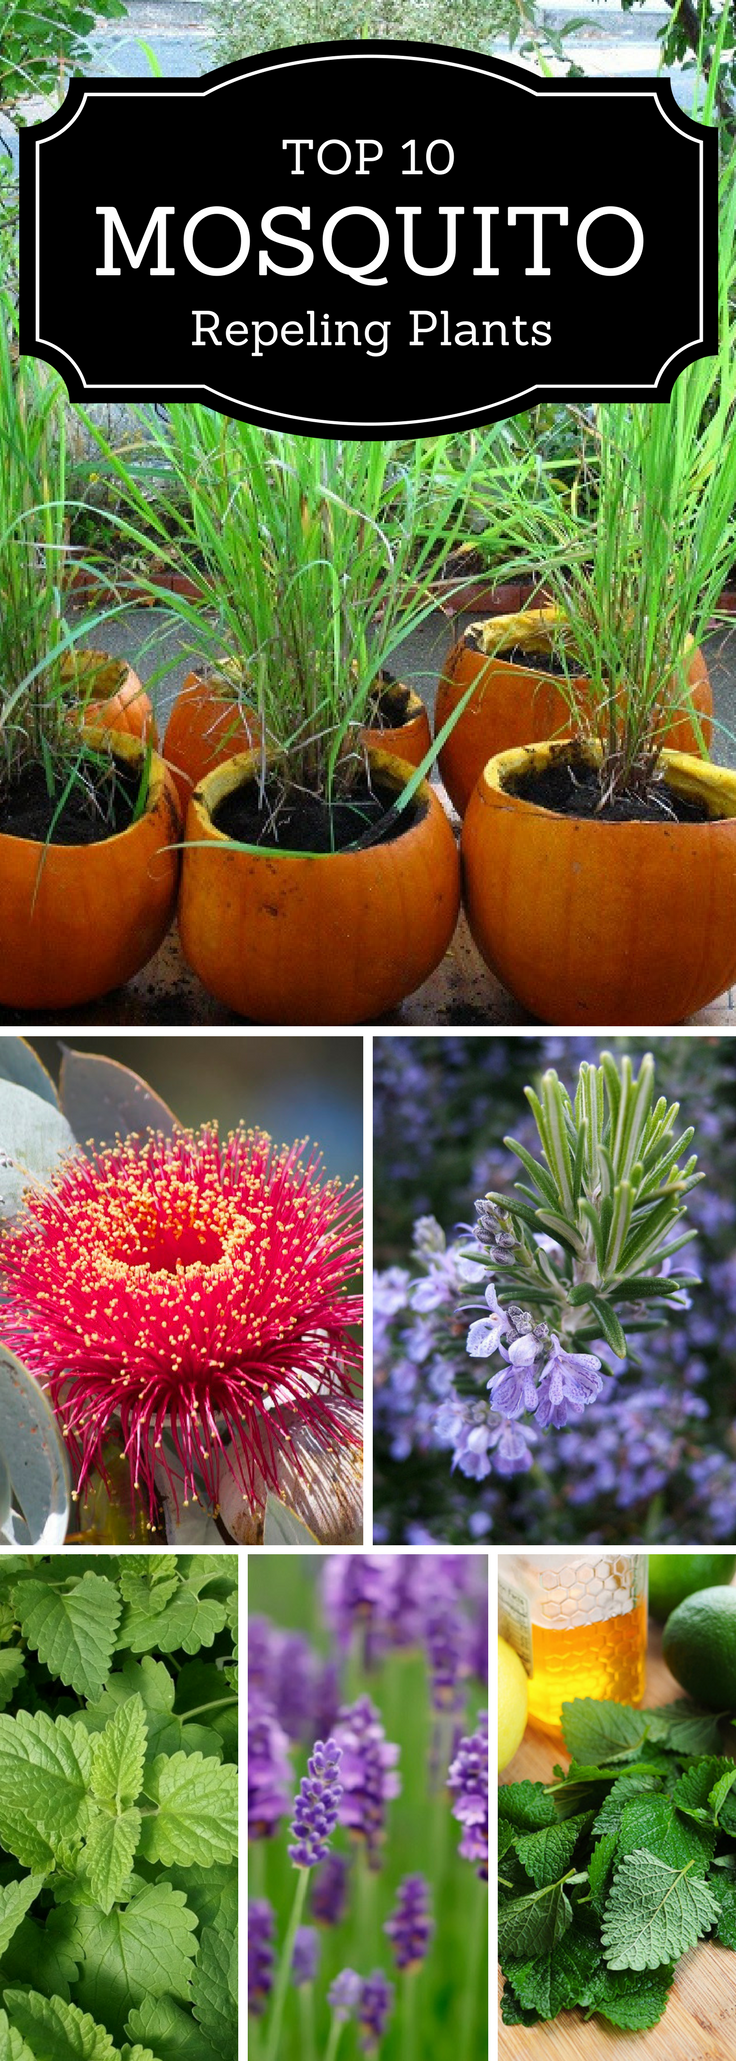 Top 10 Plants That Repel Mosquitoes -   18 plants That Repel Mosquitos patio ideas